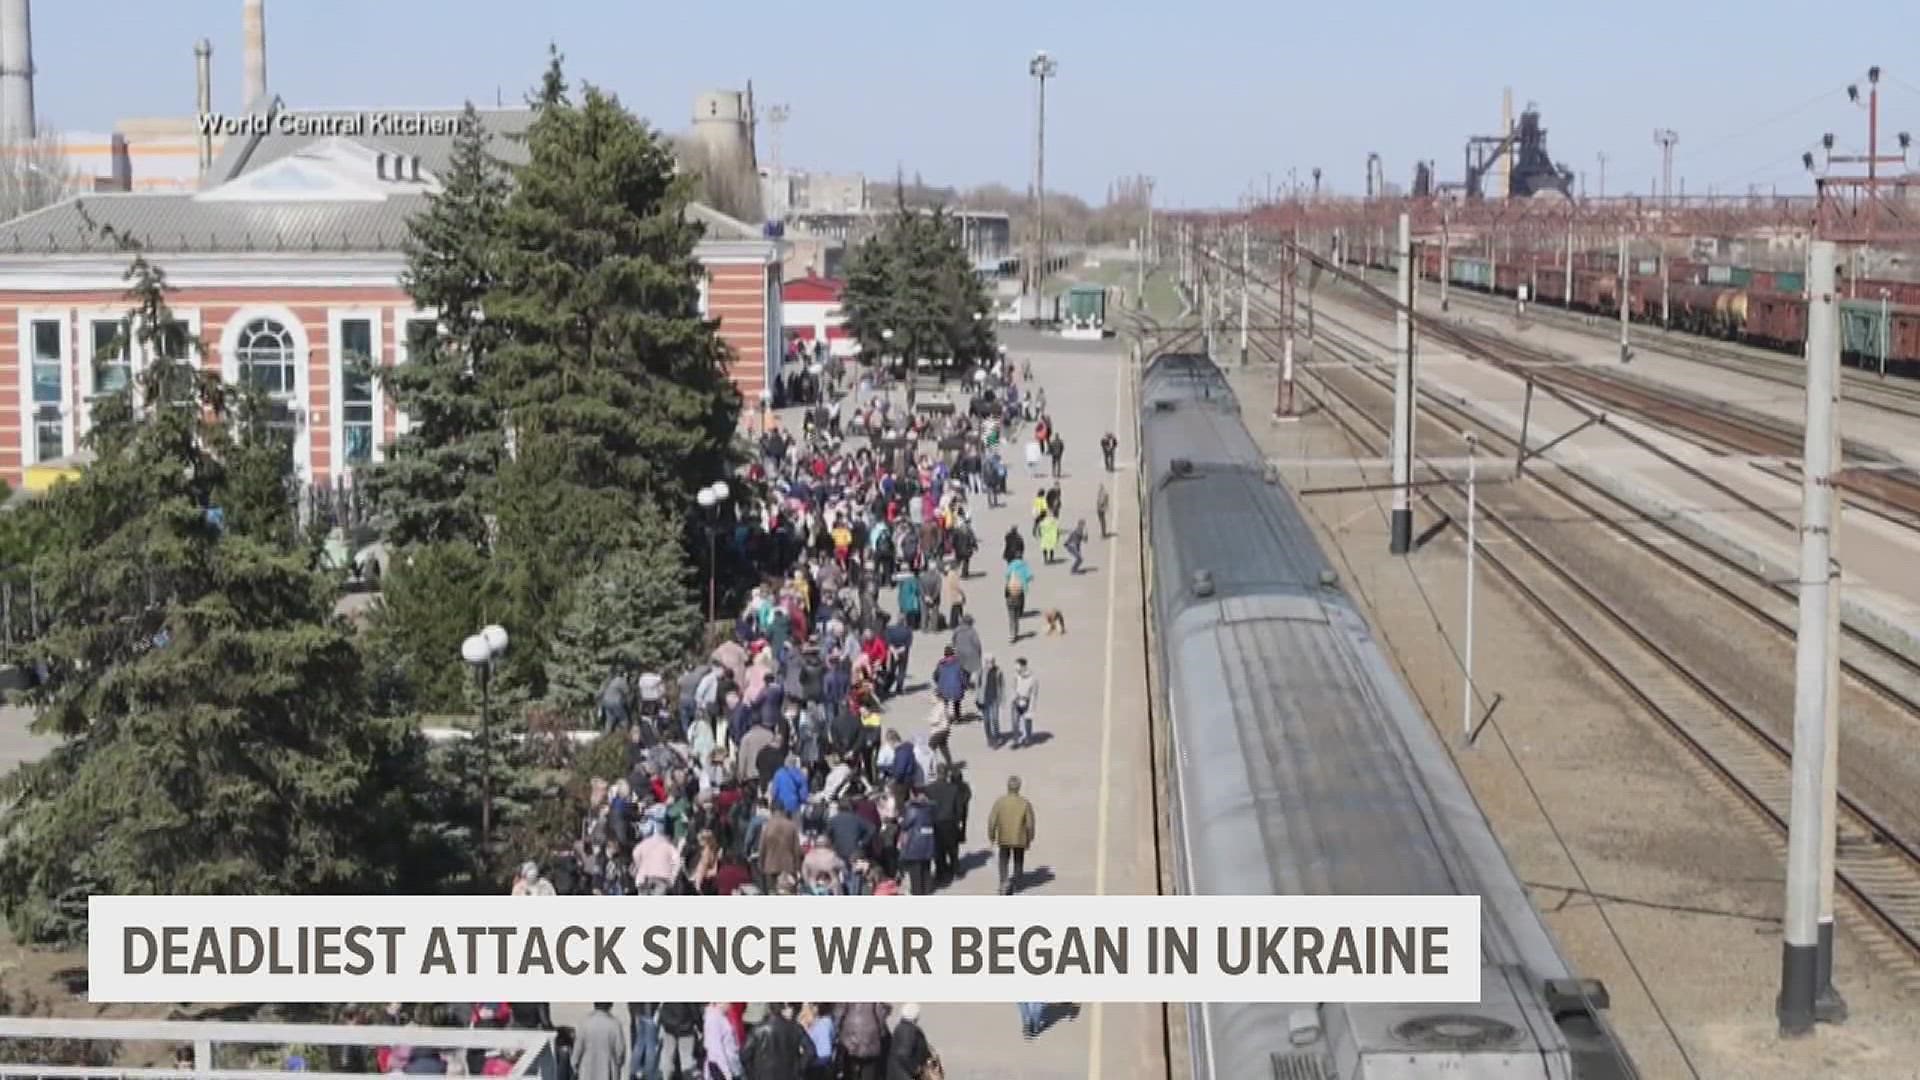 Civilian evacuations are moving forward in patches of battle-scarred eastern Ukraine a day after a missile strike killed at least 52 people at a train station.